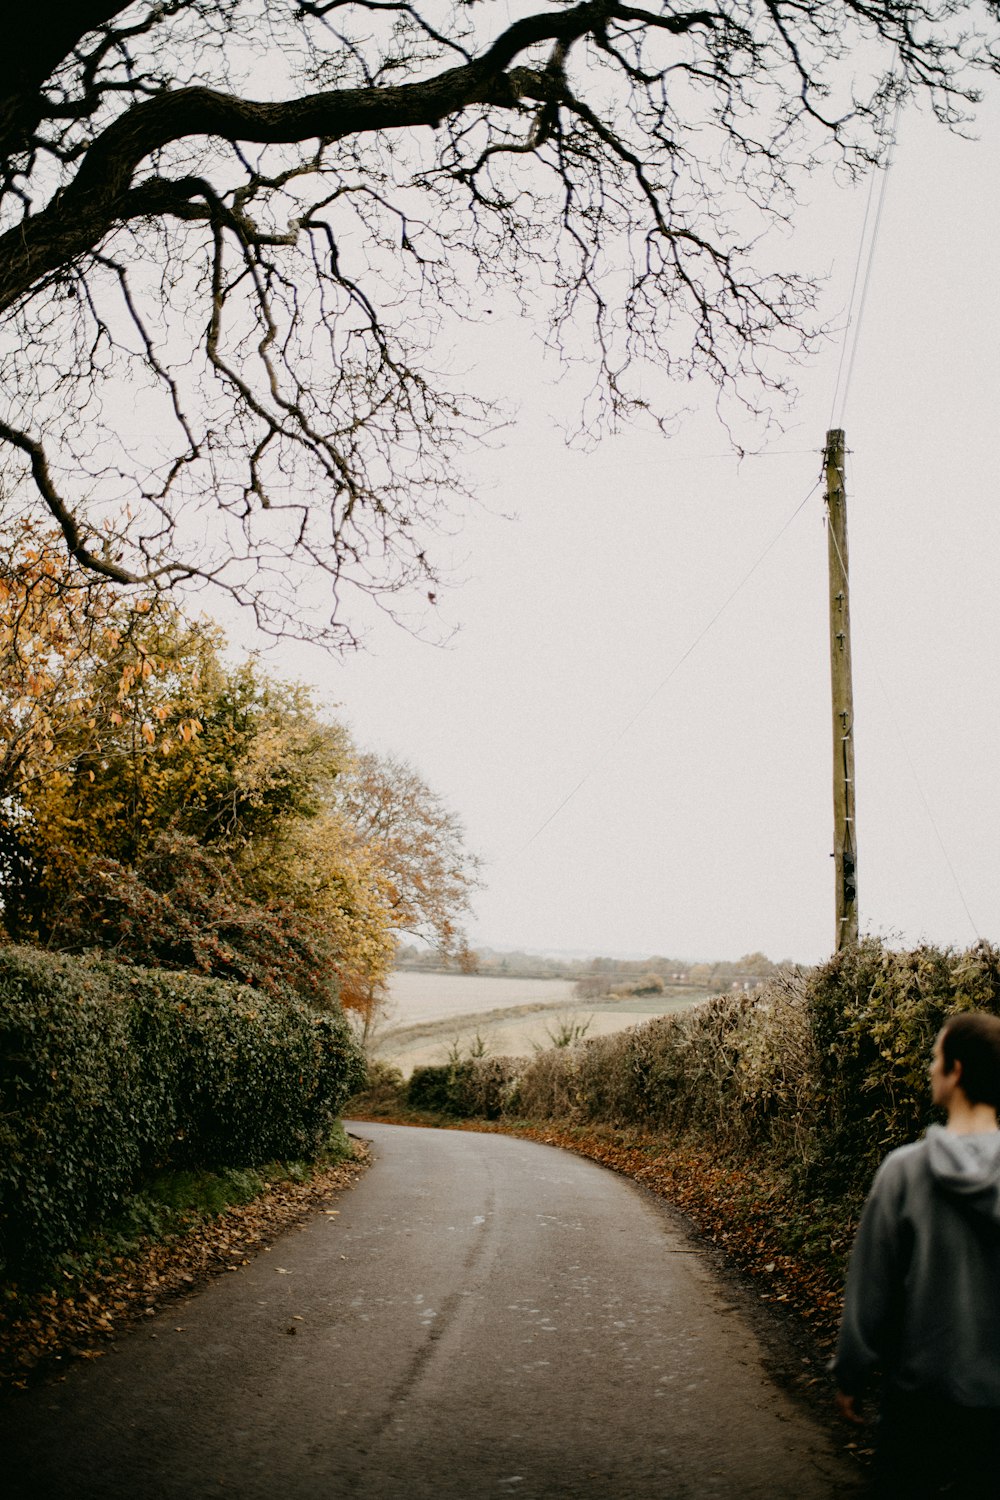 a person walking down a road next to a tree